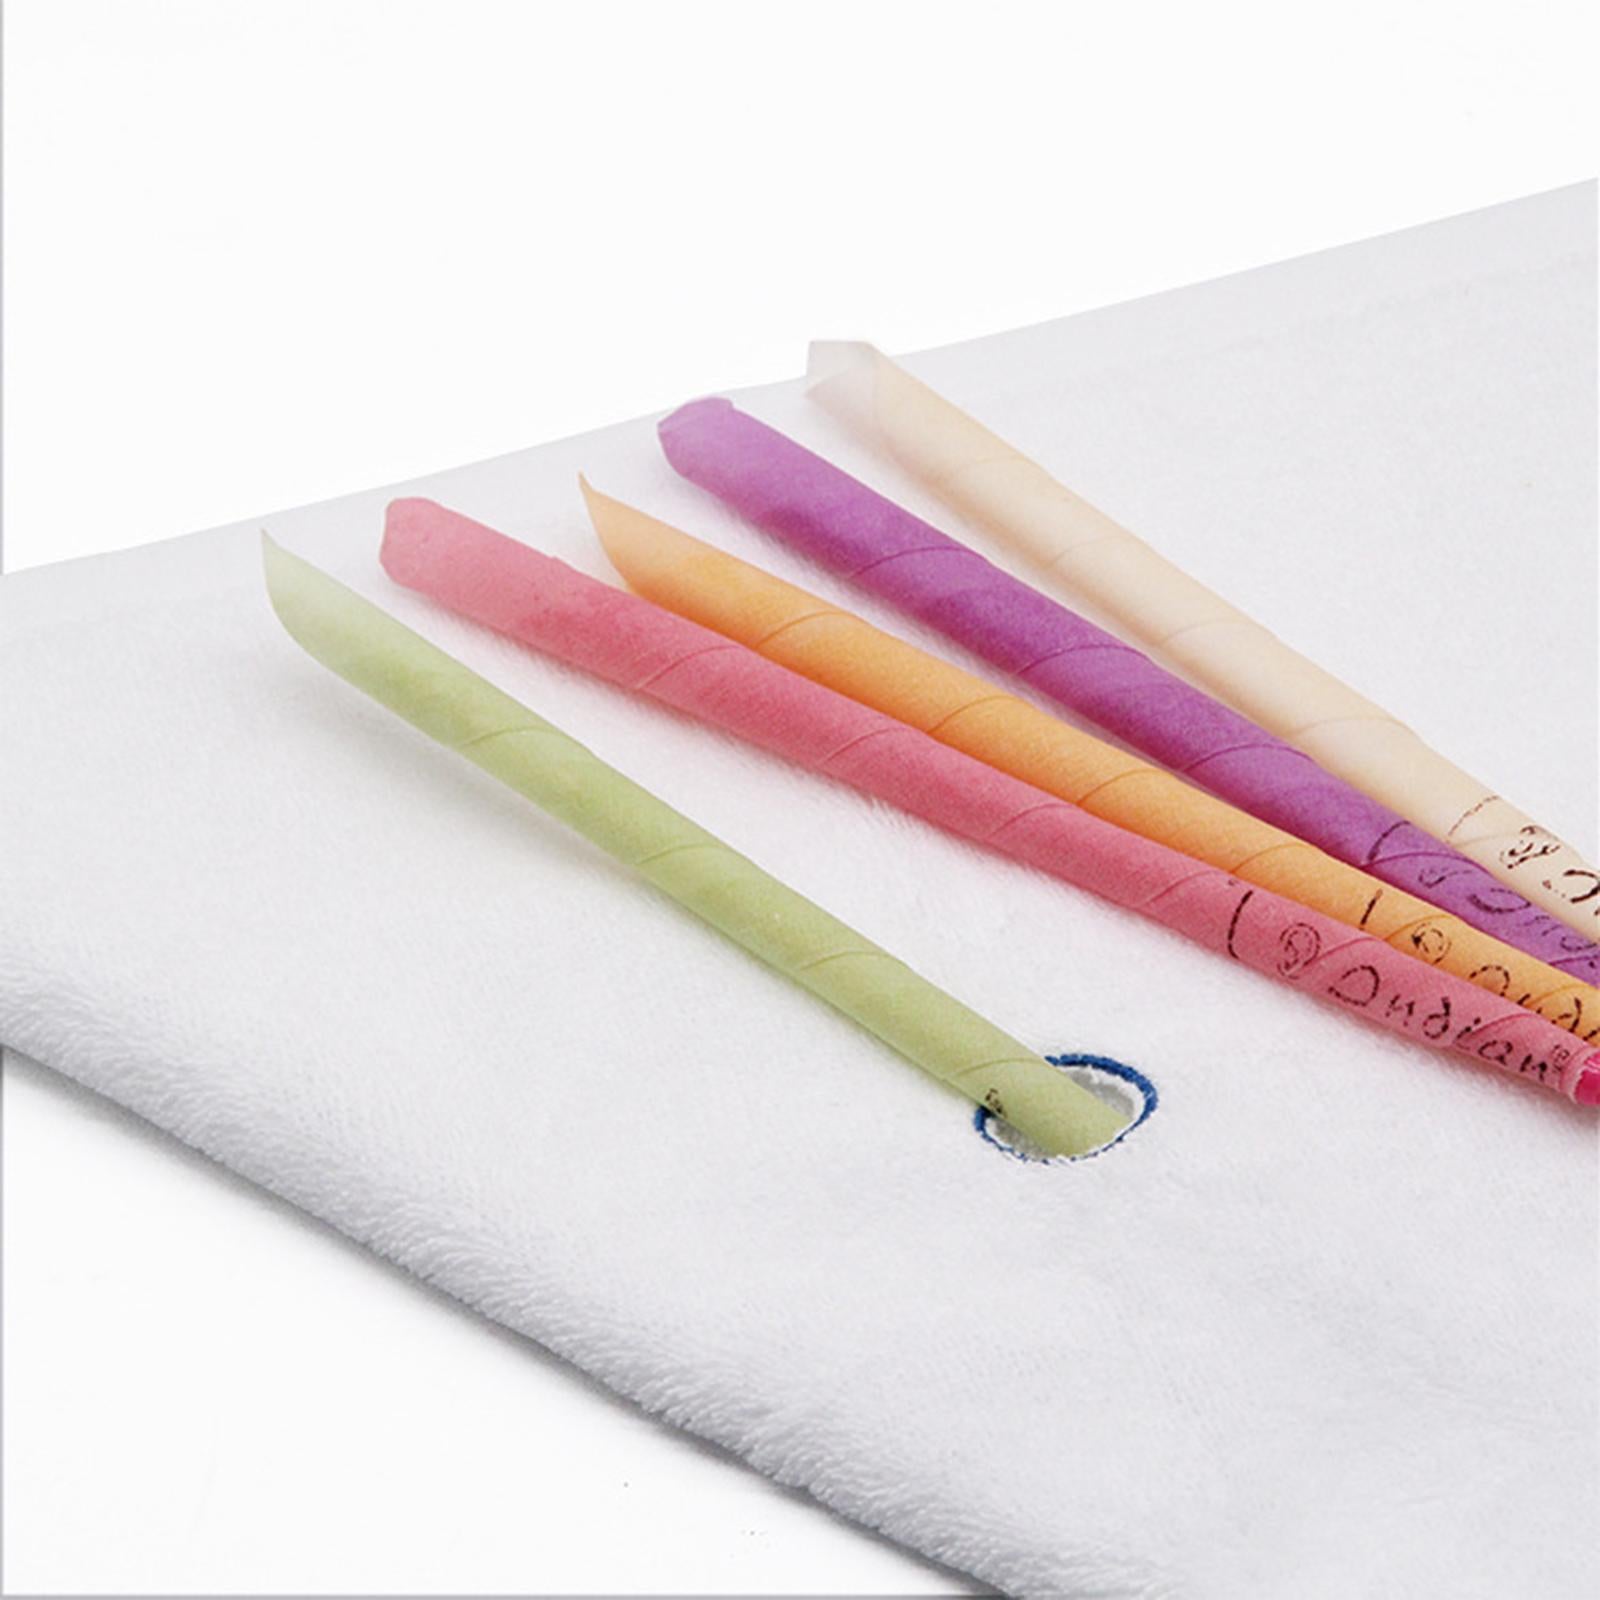 1 Piece Ear Candling Treatment Towel Protective Towel Improve Comfort Safety